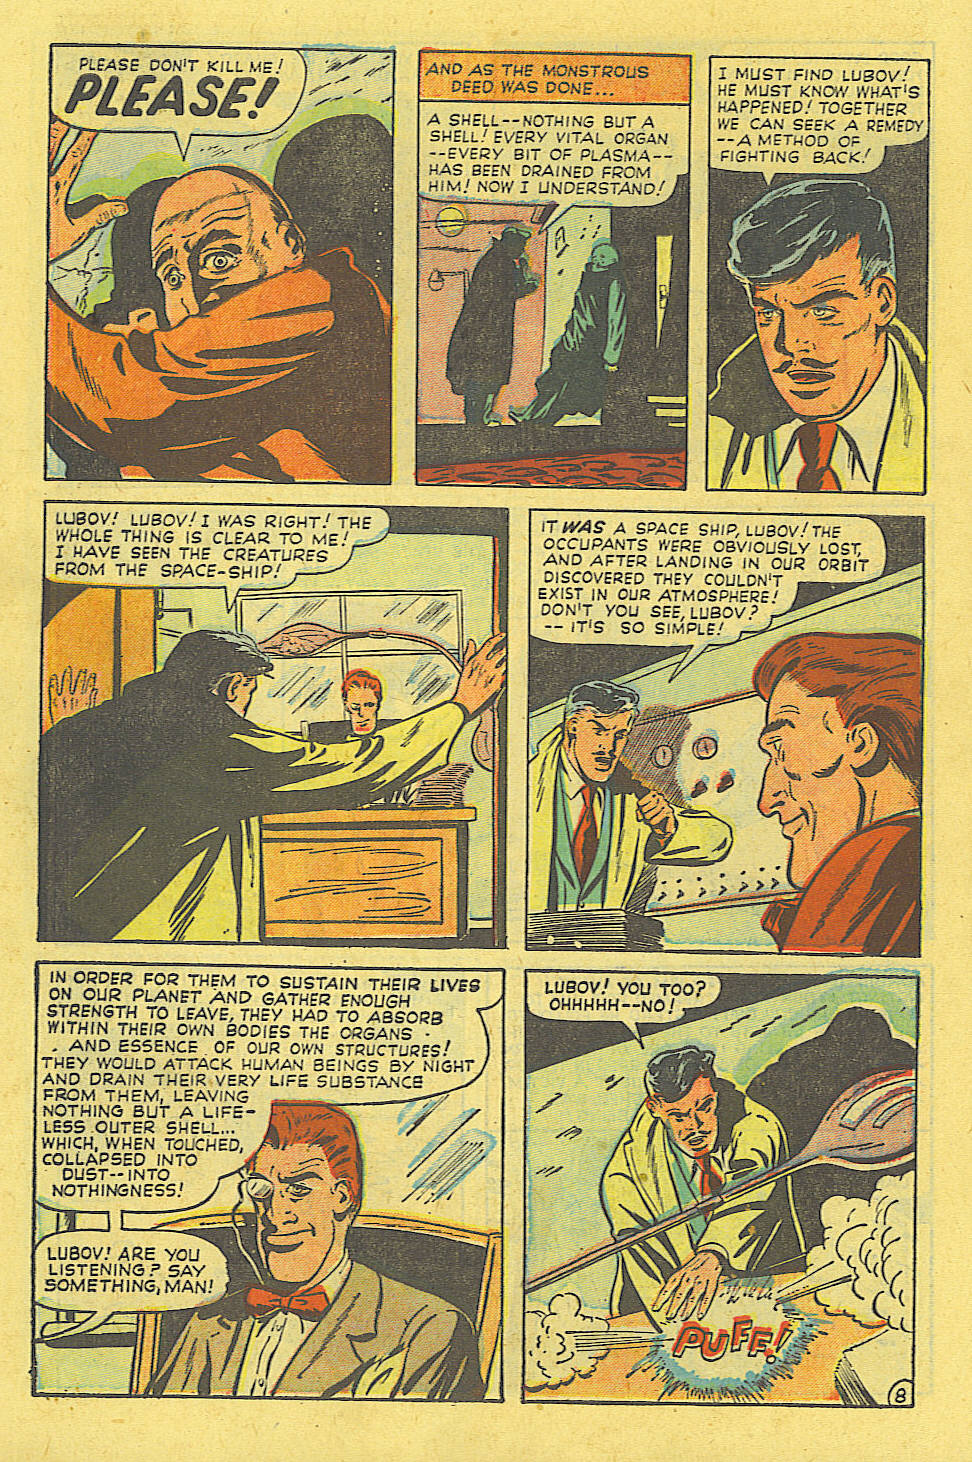 Marvel Tales (1949) 95 Page 8